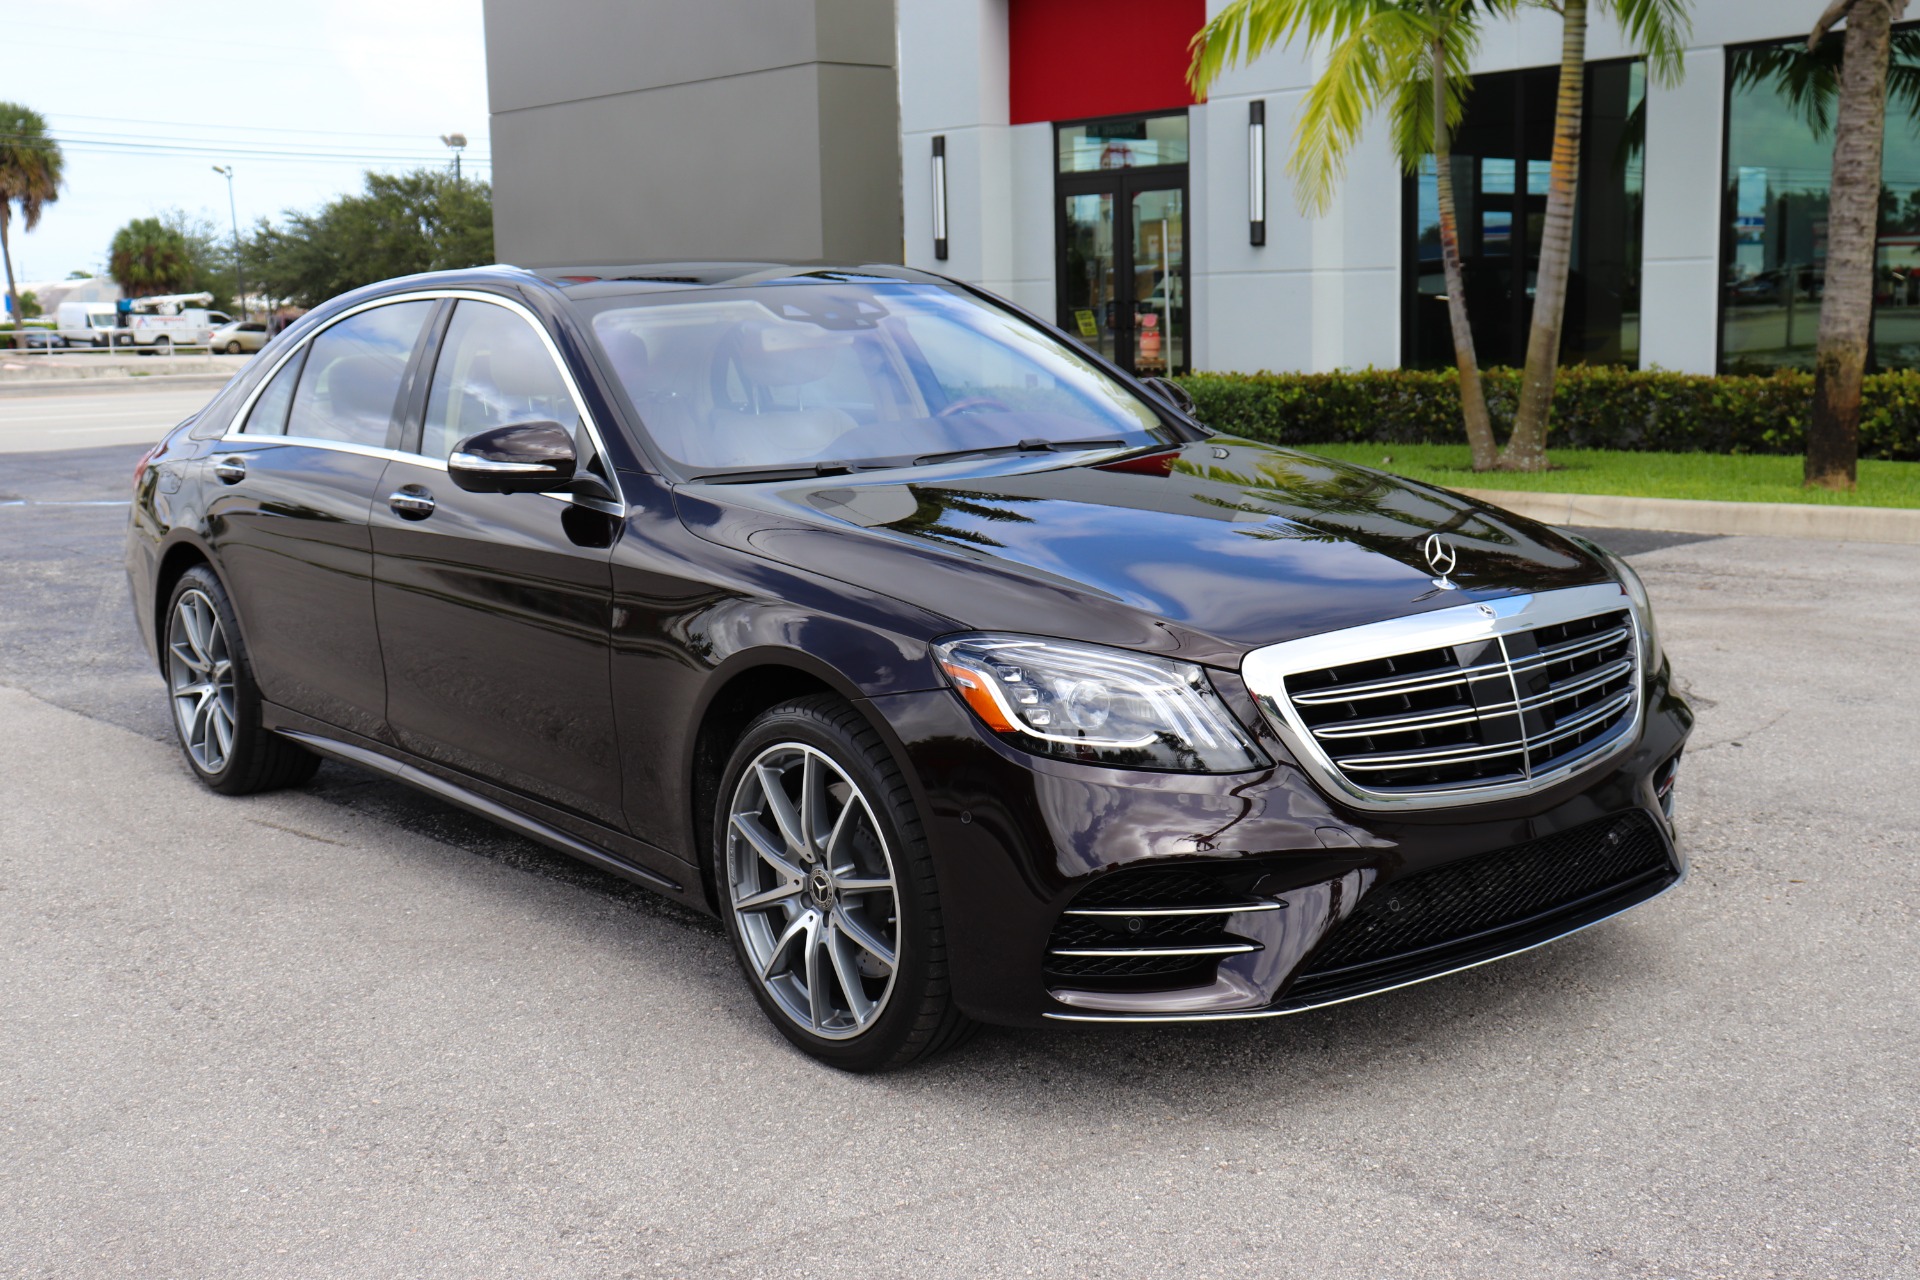 Used 2018 MercedesBenz SClass S 560 For Sale (85,900